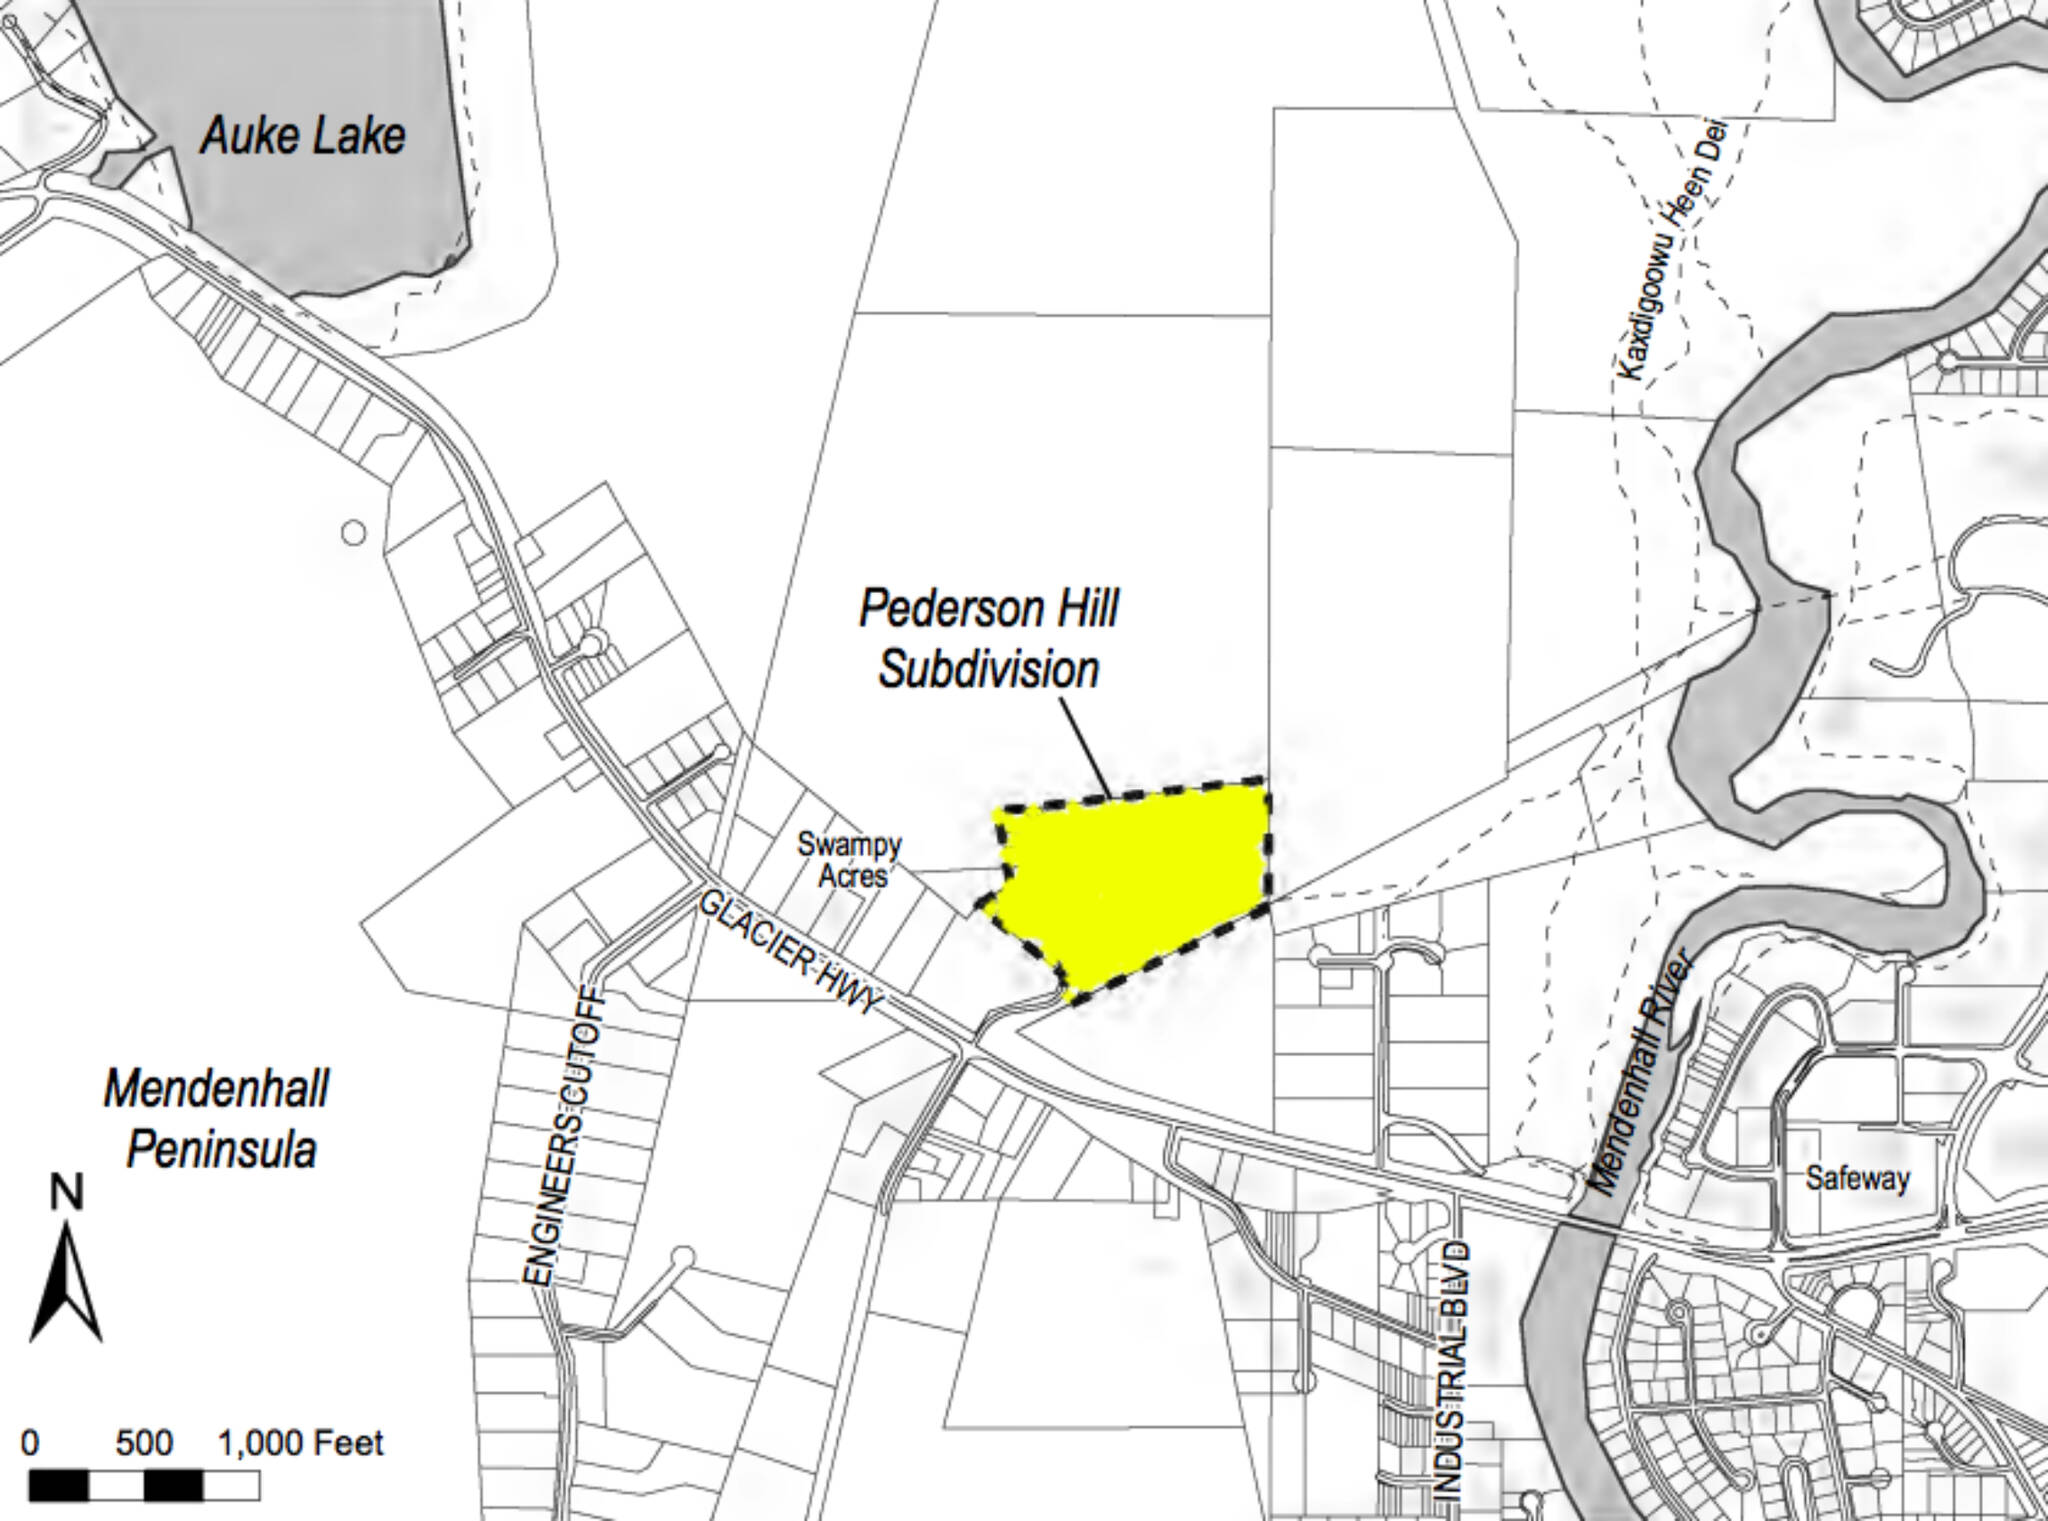 This is a screenshot of a map showing the location of 11.5 acres of city-owned land on Pederson Hill the Juneau Assembly OK’d to transfer to the Tlingit Haida Regional Housing Authority Monday night for less than fair market value. (Clarise Larson / Juneau Empire)